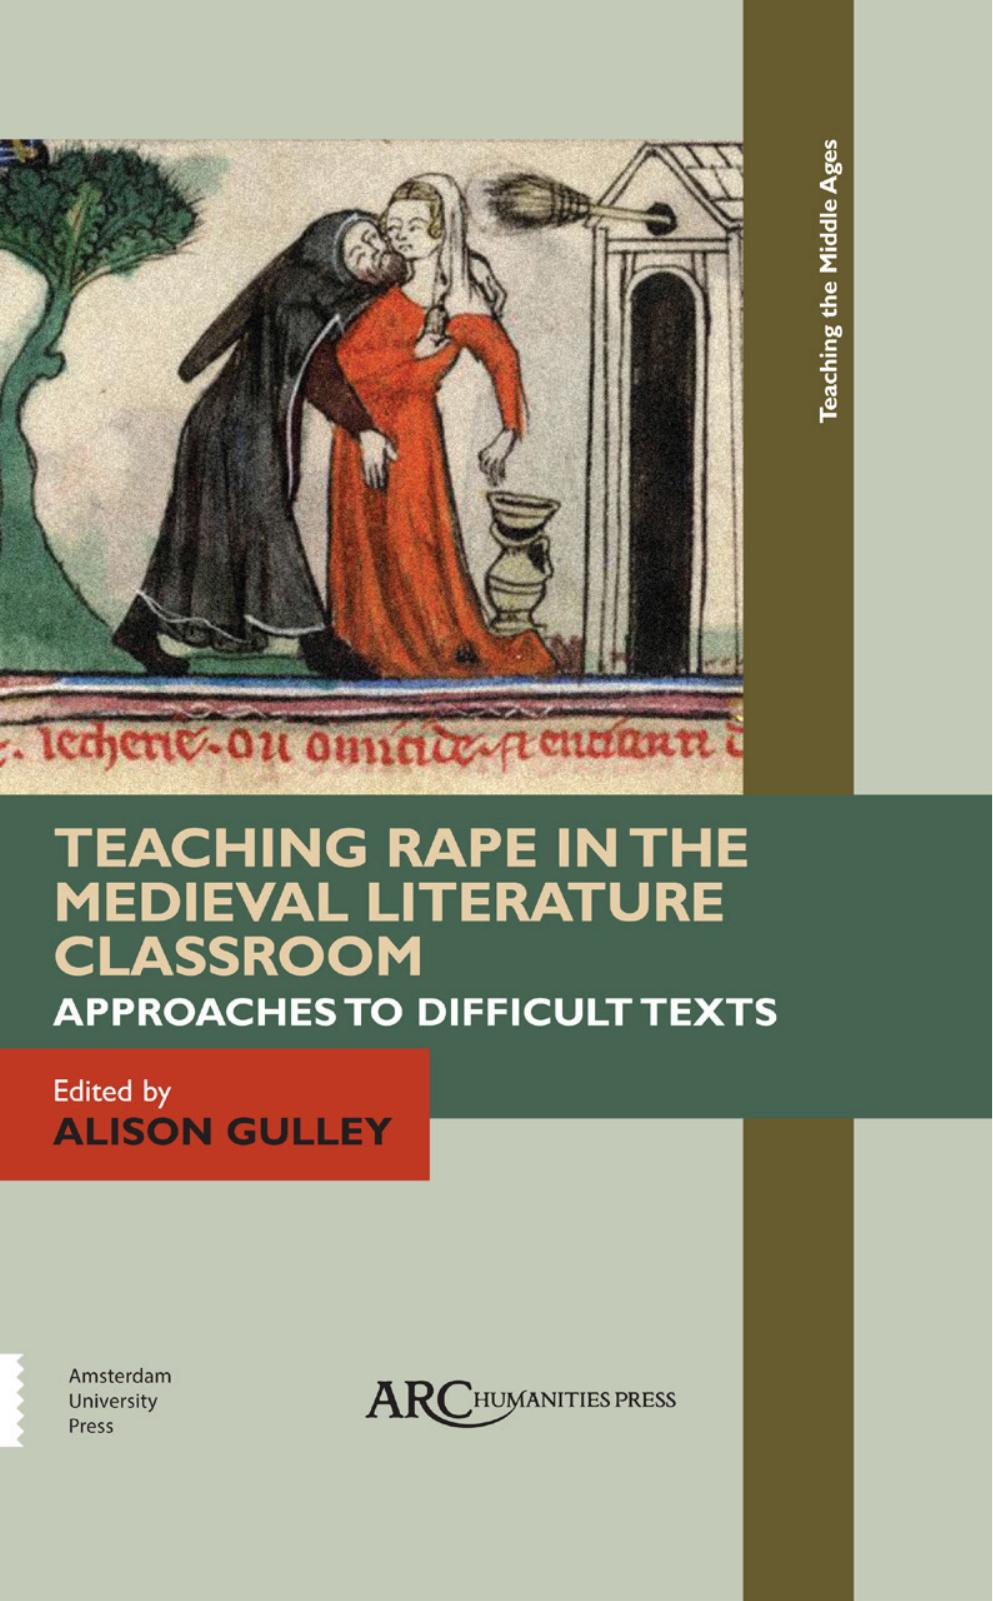 Teaching Rape in the Medieval Literature Classroom: Approaches to Difficult Texts by Alison Gulley (Editor)